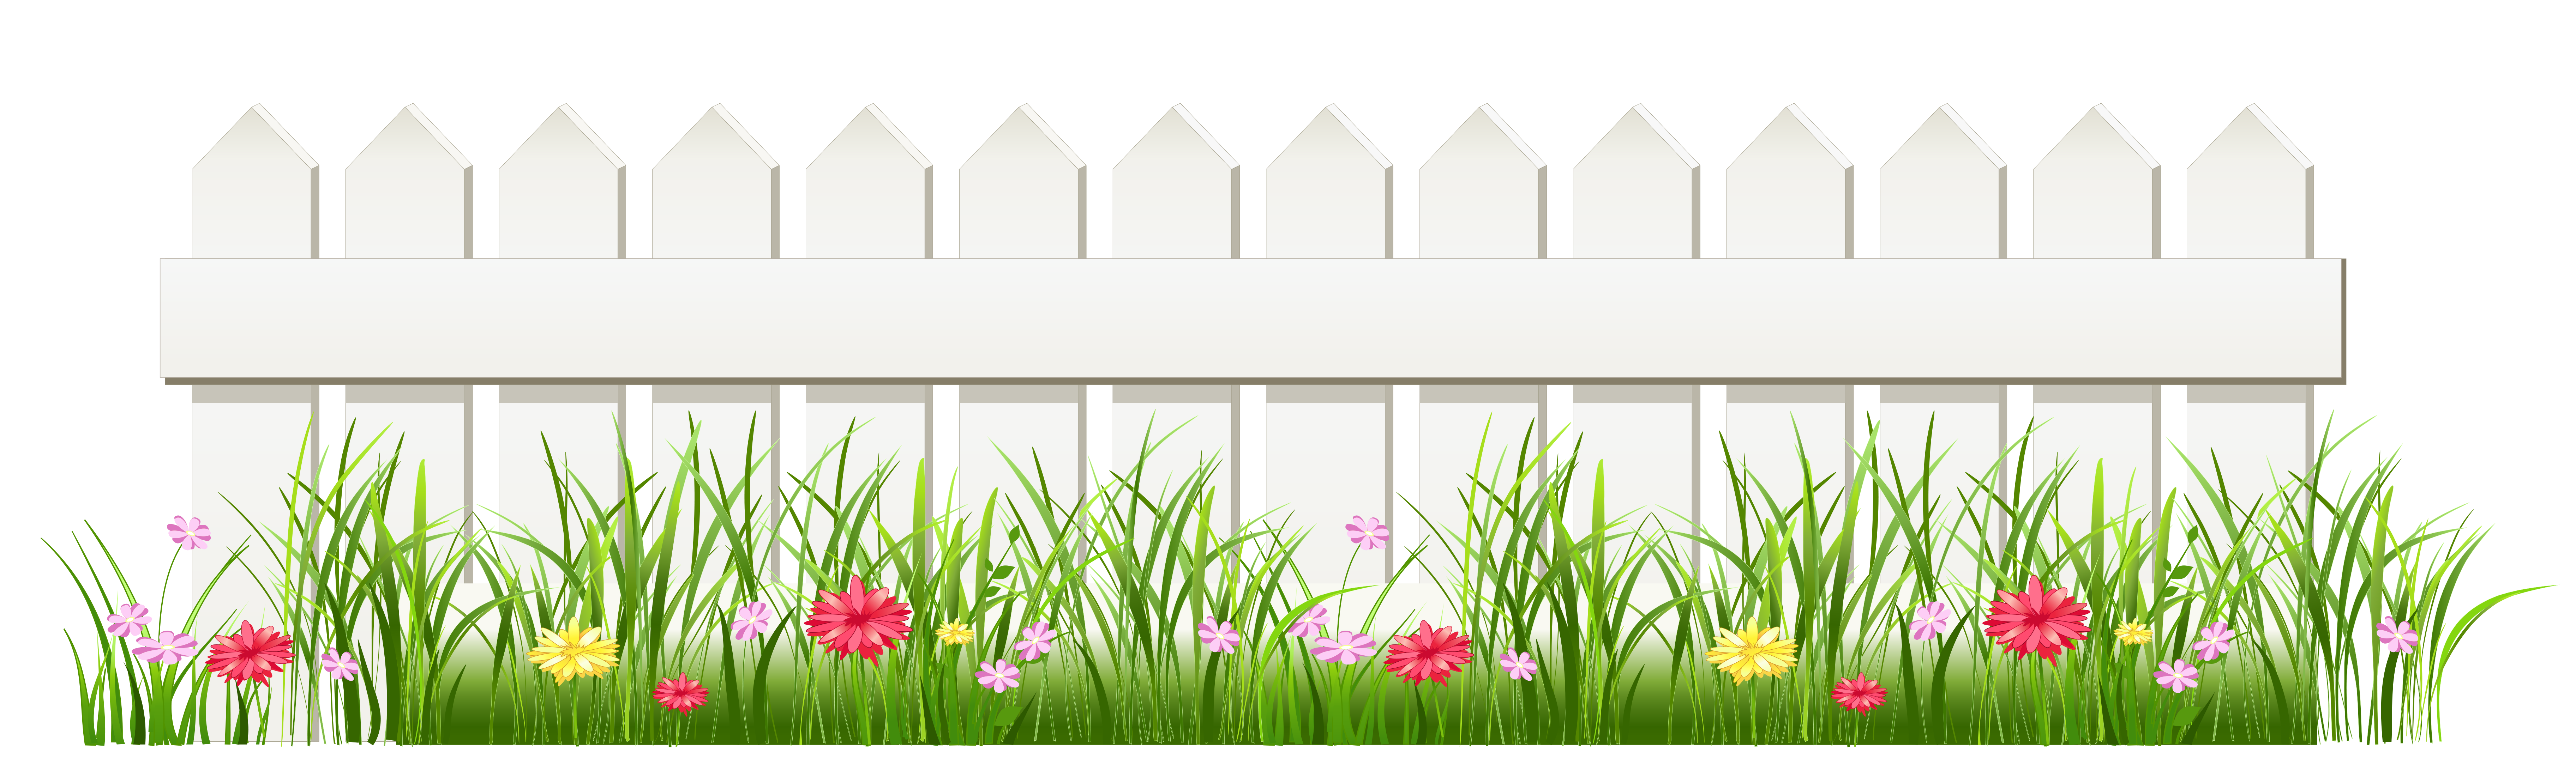 Transparent white with grass. Fence clipart painting fence